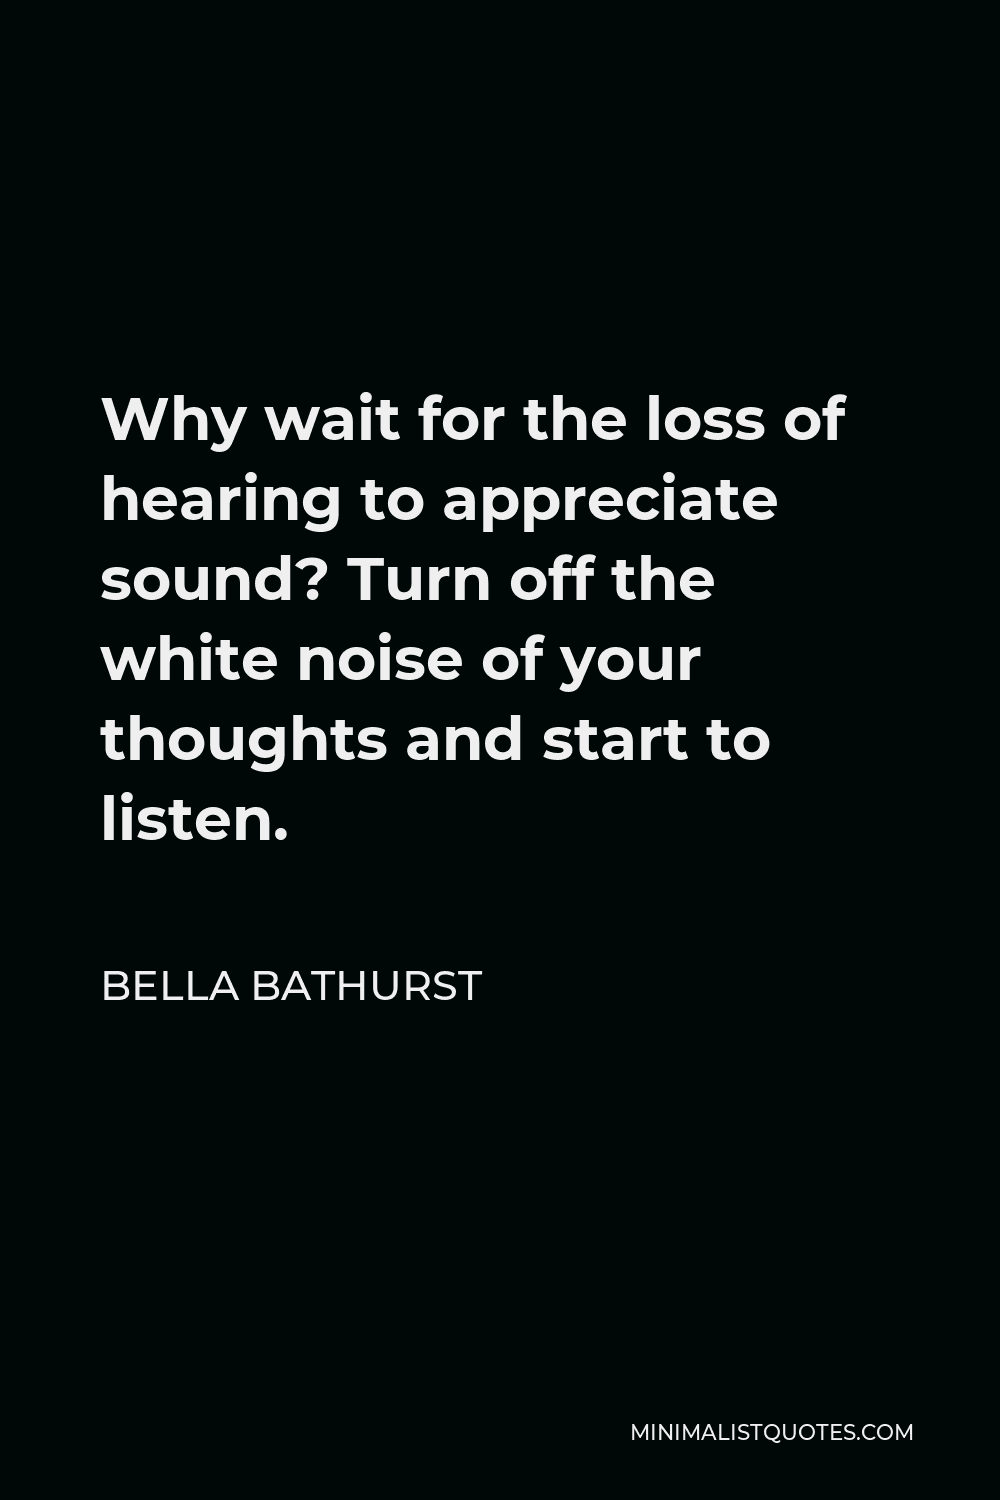 Bella Bathurst Quote - Why wait for the loss of hearing to appreciate sound? Turn off the white noise of your thoughts and start to listen.